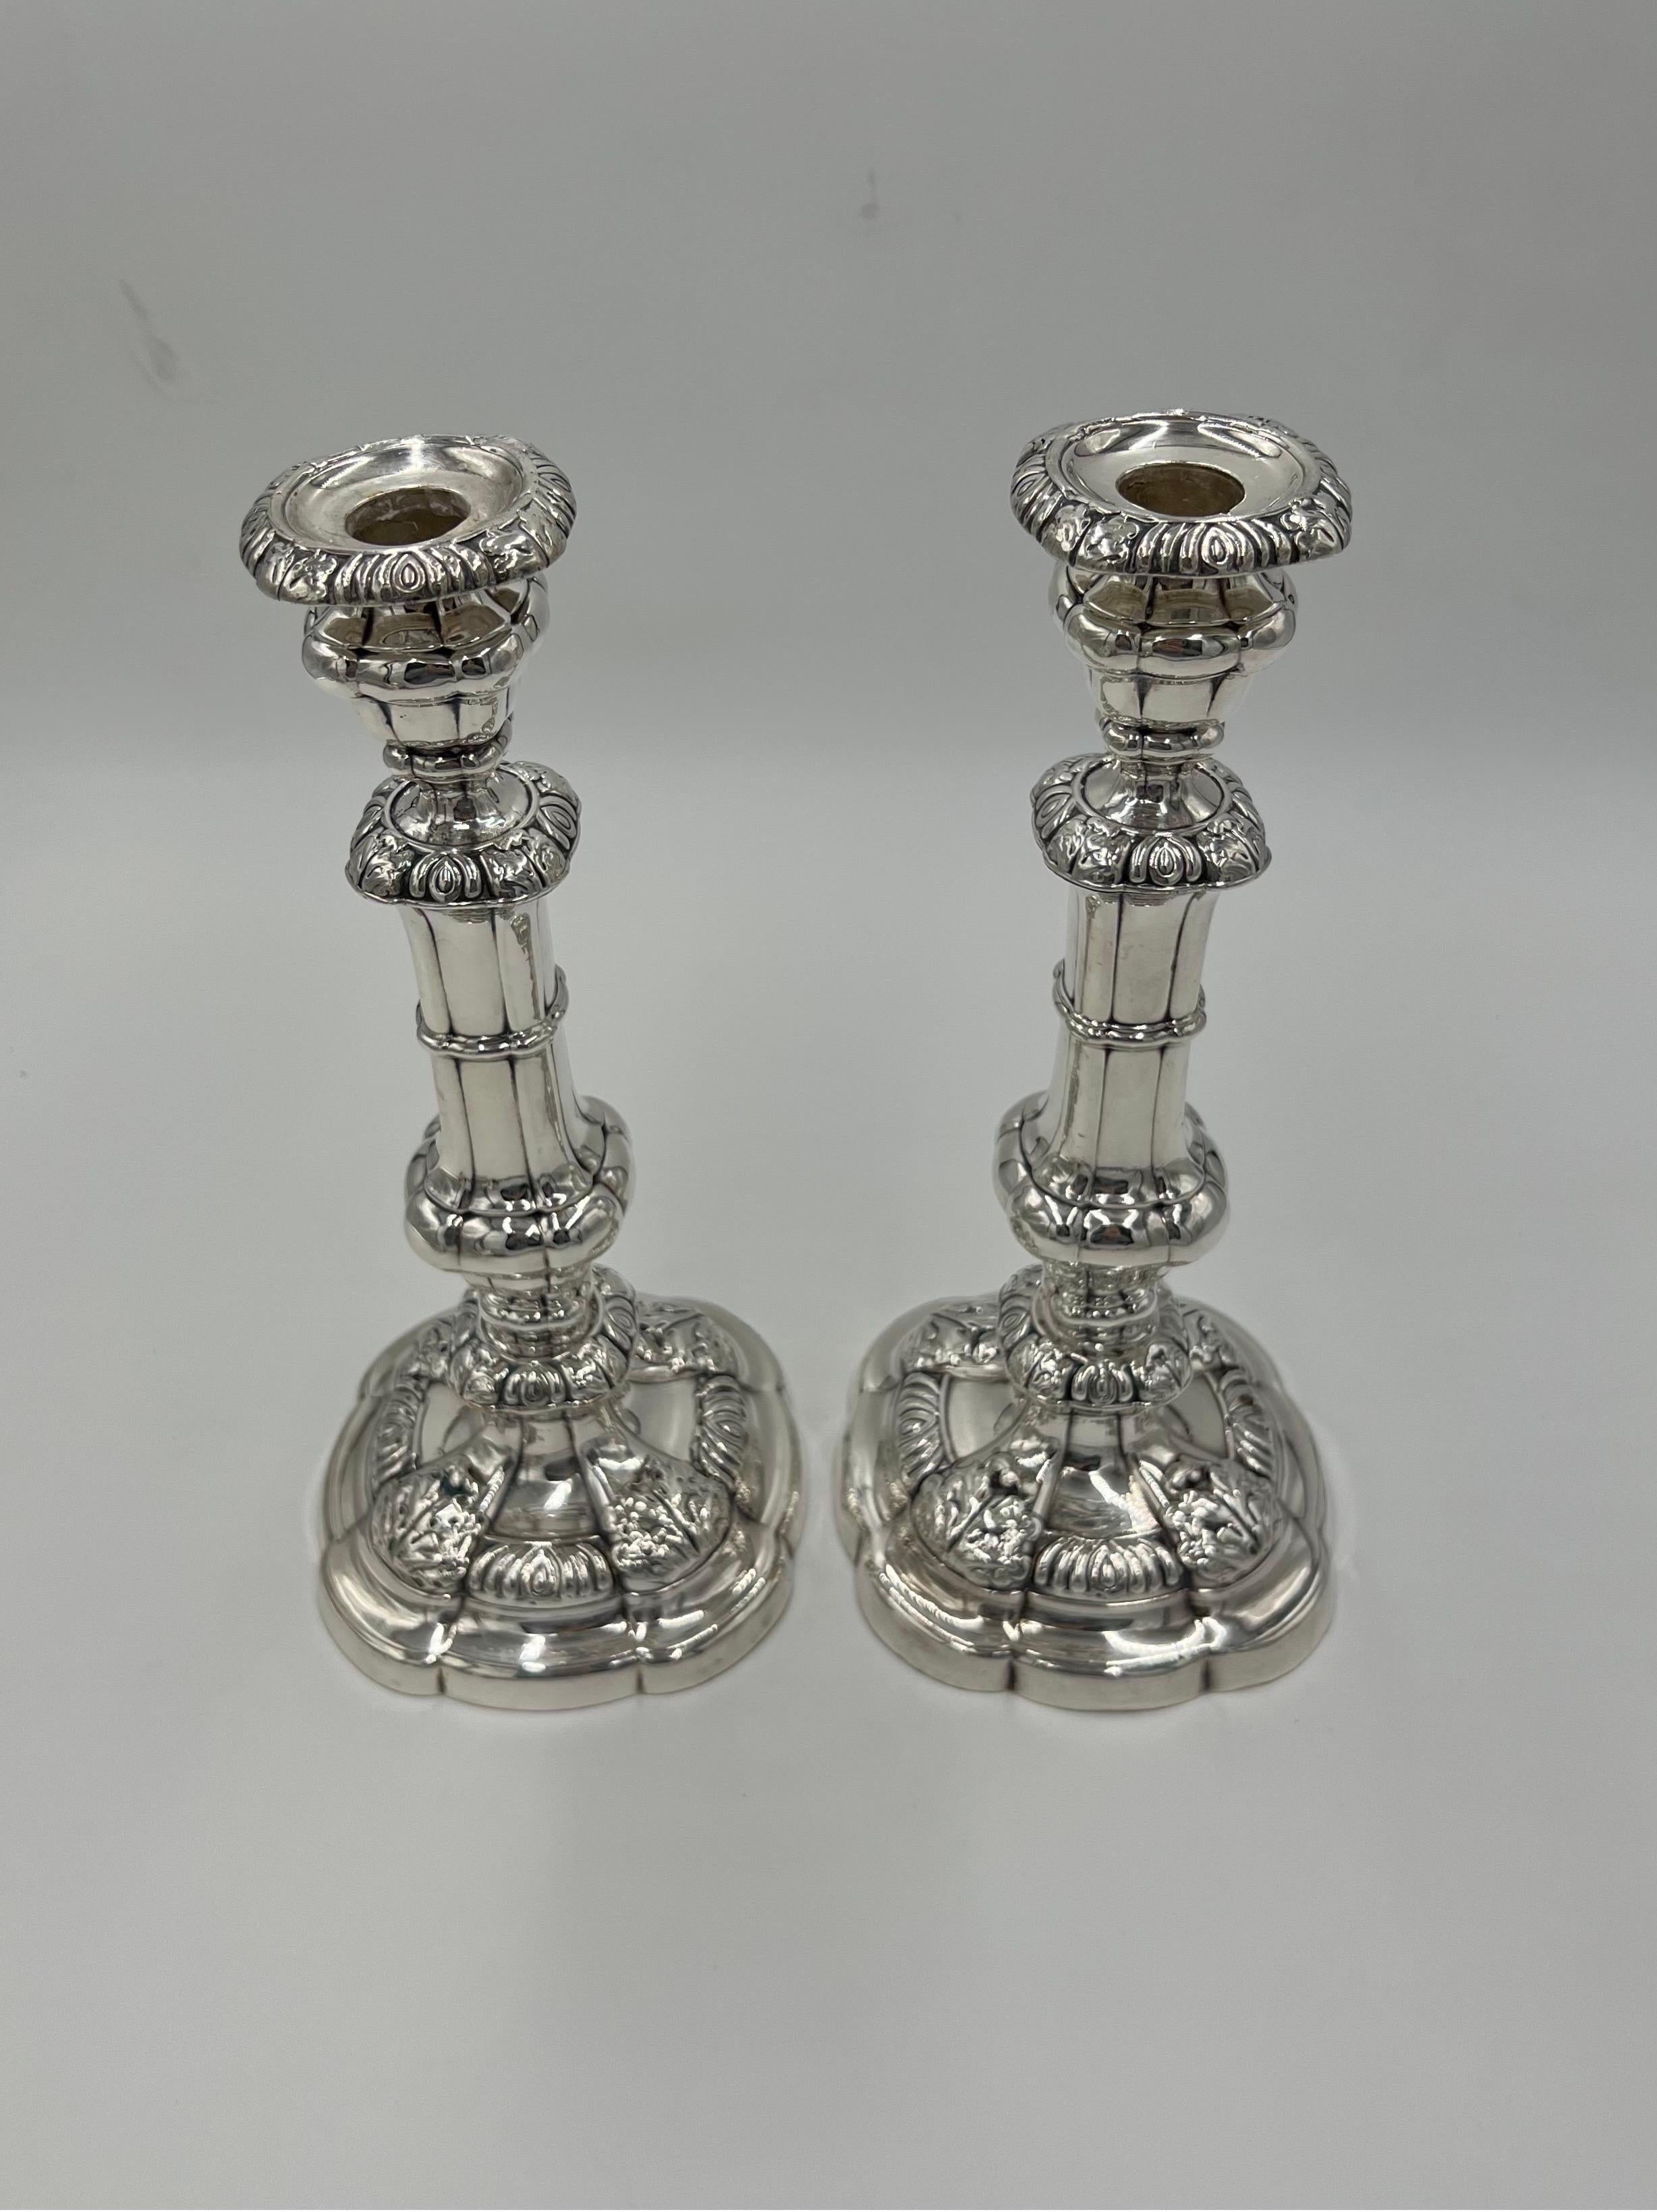 A pair of George II period sterling silver candlesticks. The tops of each with removable holders, gadrooning to edges, fluted columns supports to center stems and banding accents. The stems terminate into a scalloped edge base accented by acanthus